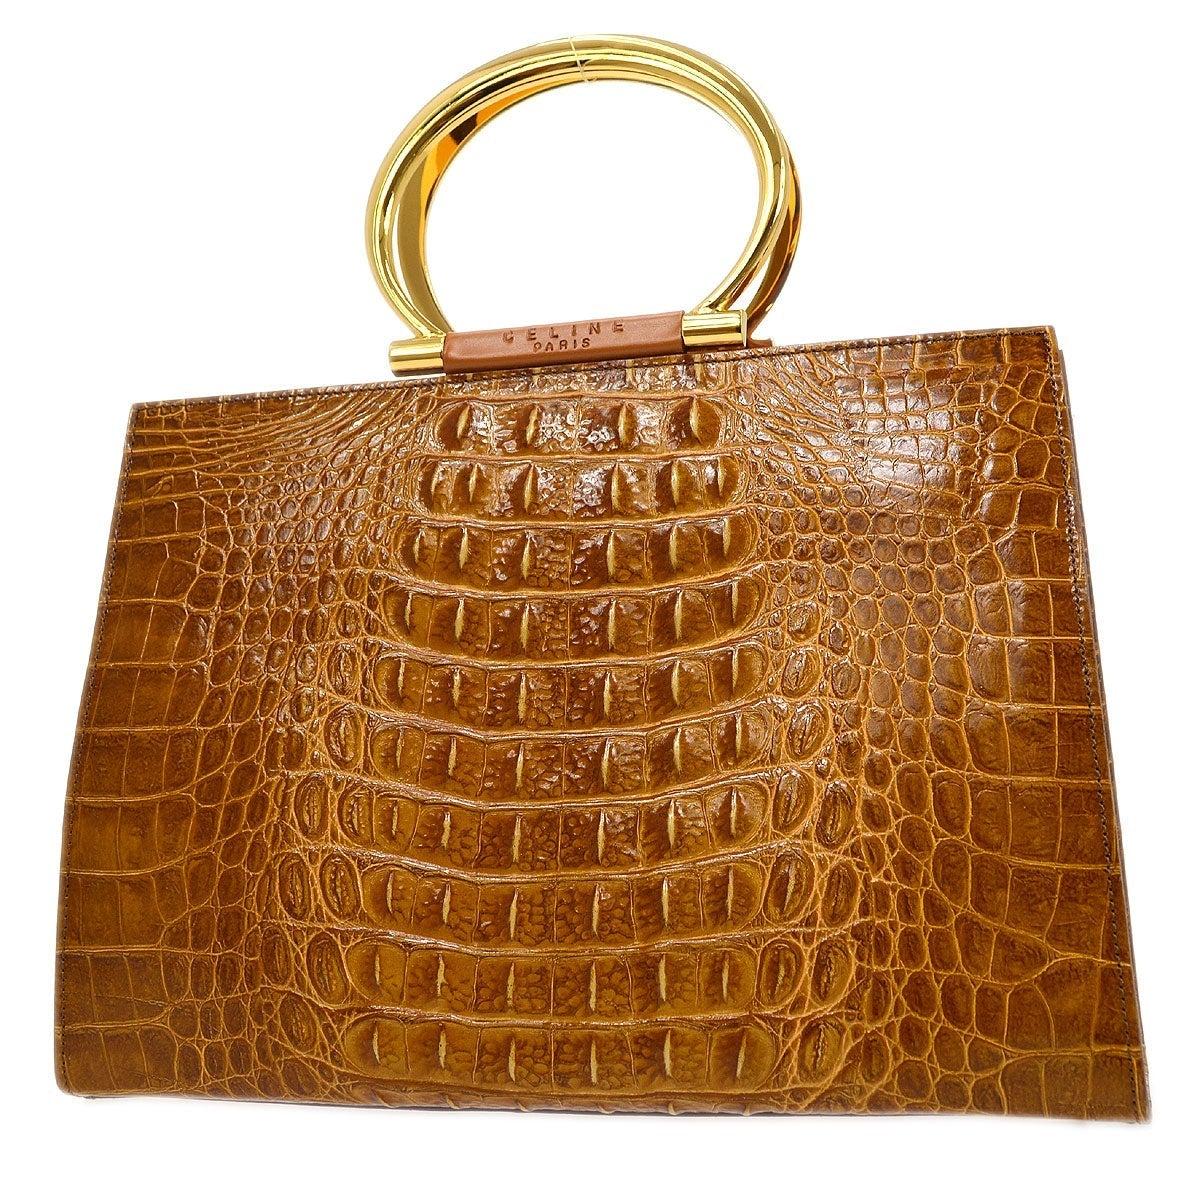 Pre-Owned Vintage Condition
Crocodile 
Gold Tone Hardware
Woven Lining
Measures 12.5